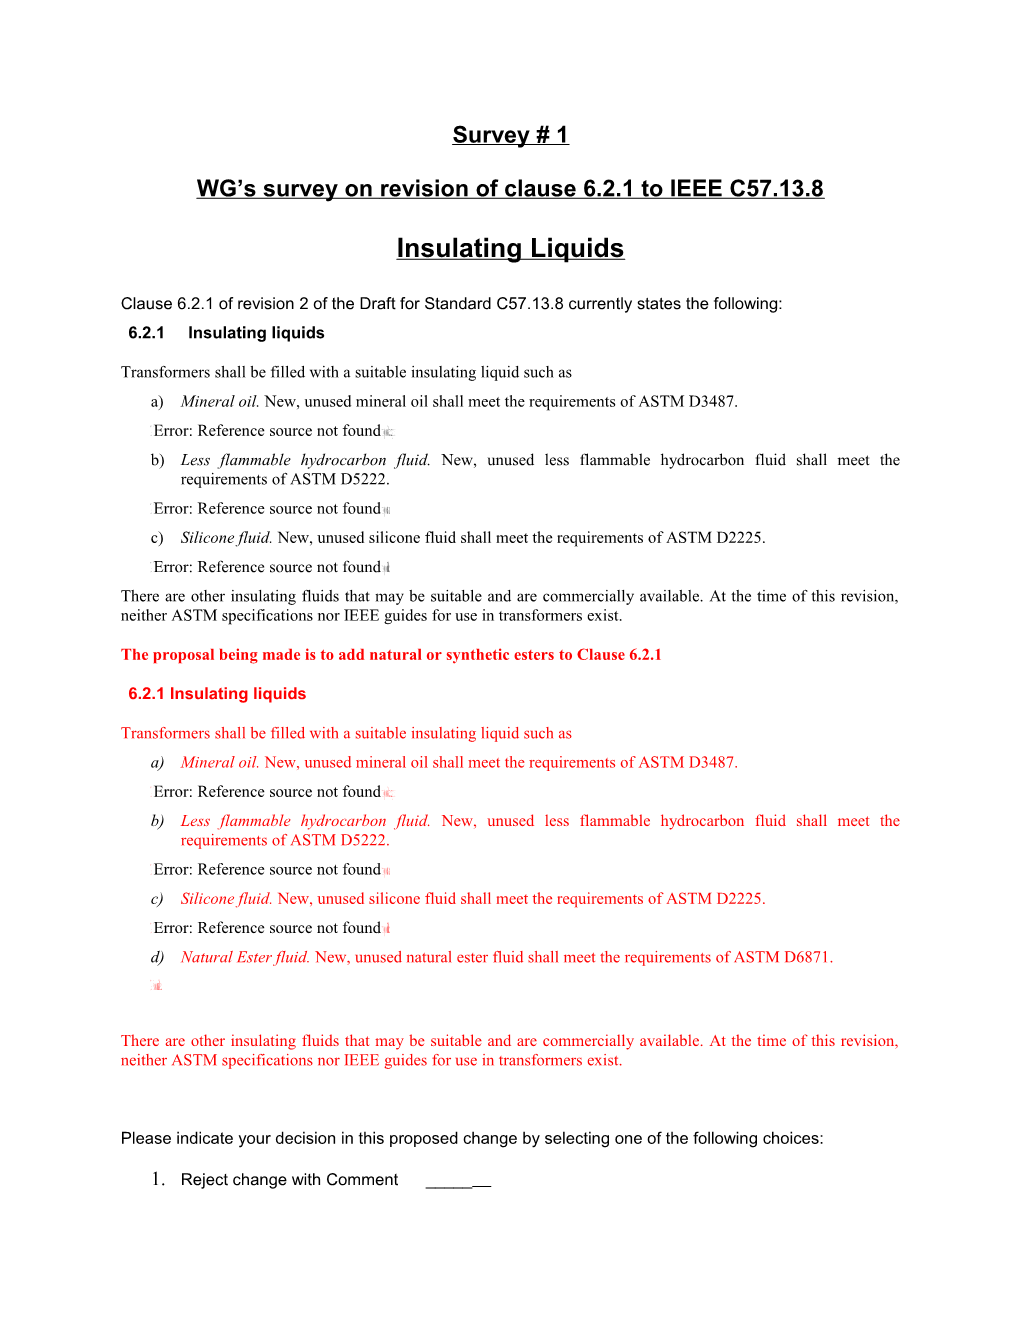 WG S Survey on Revision of Clause 6.2.1 to IEEE C57.13.8